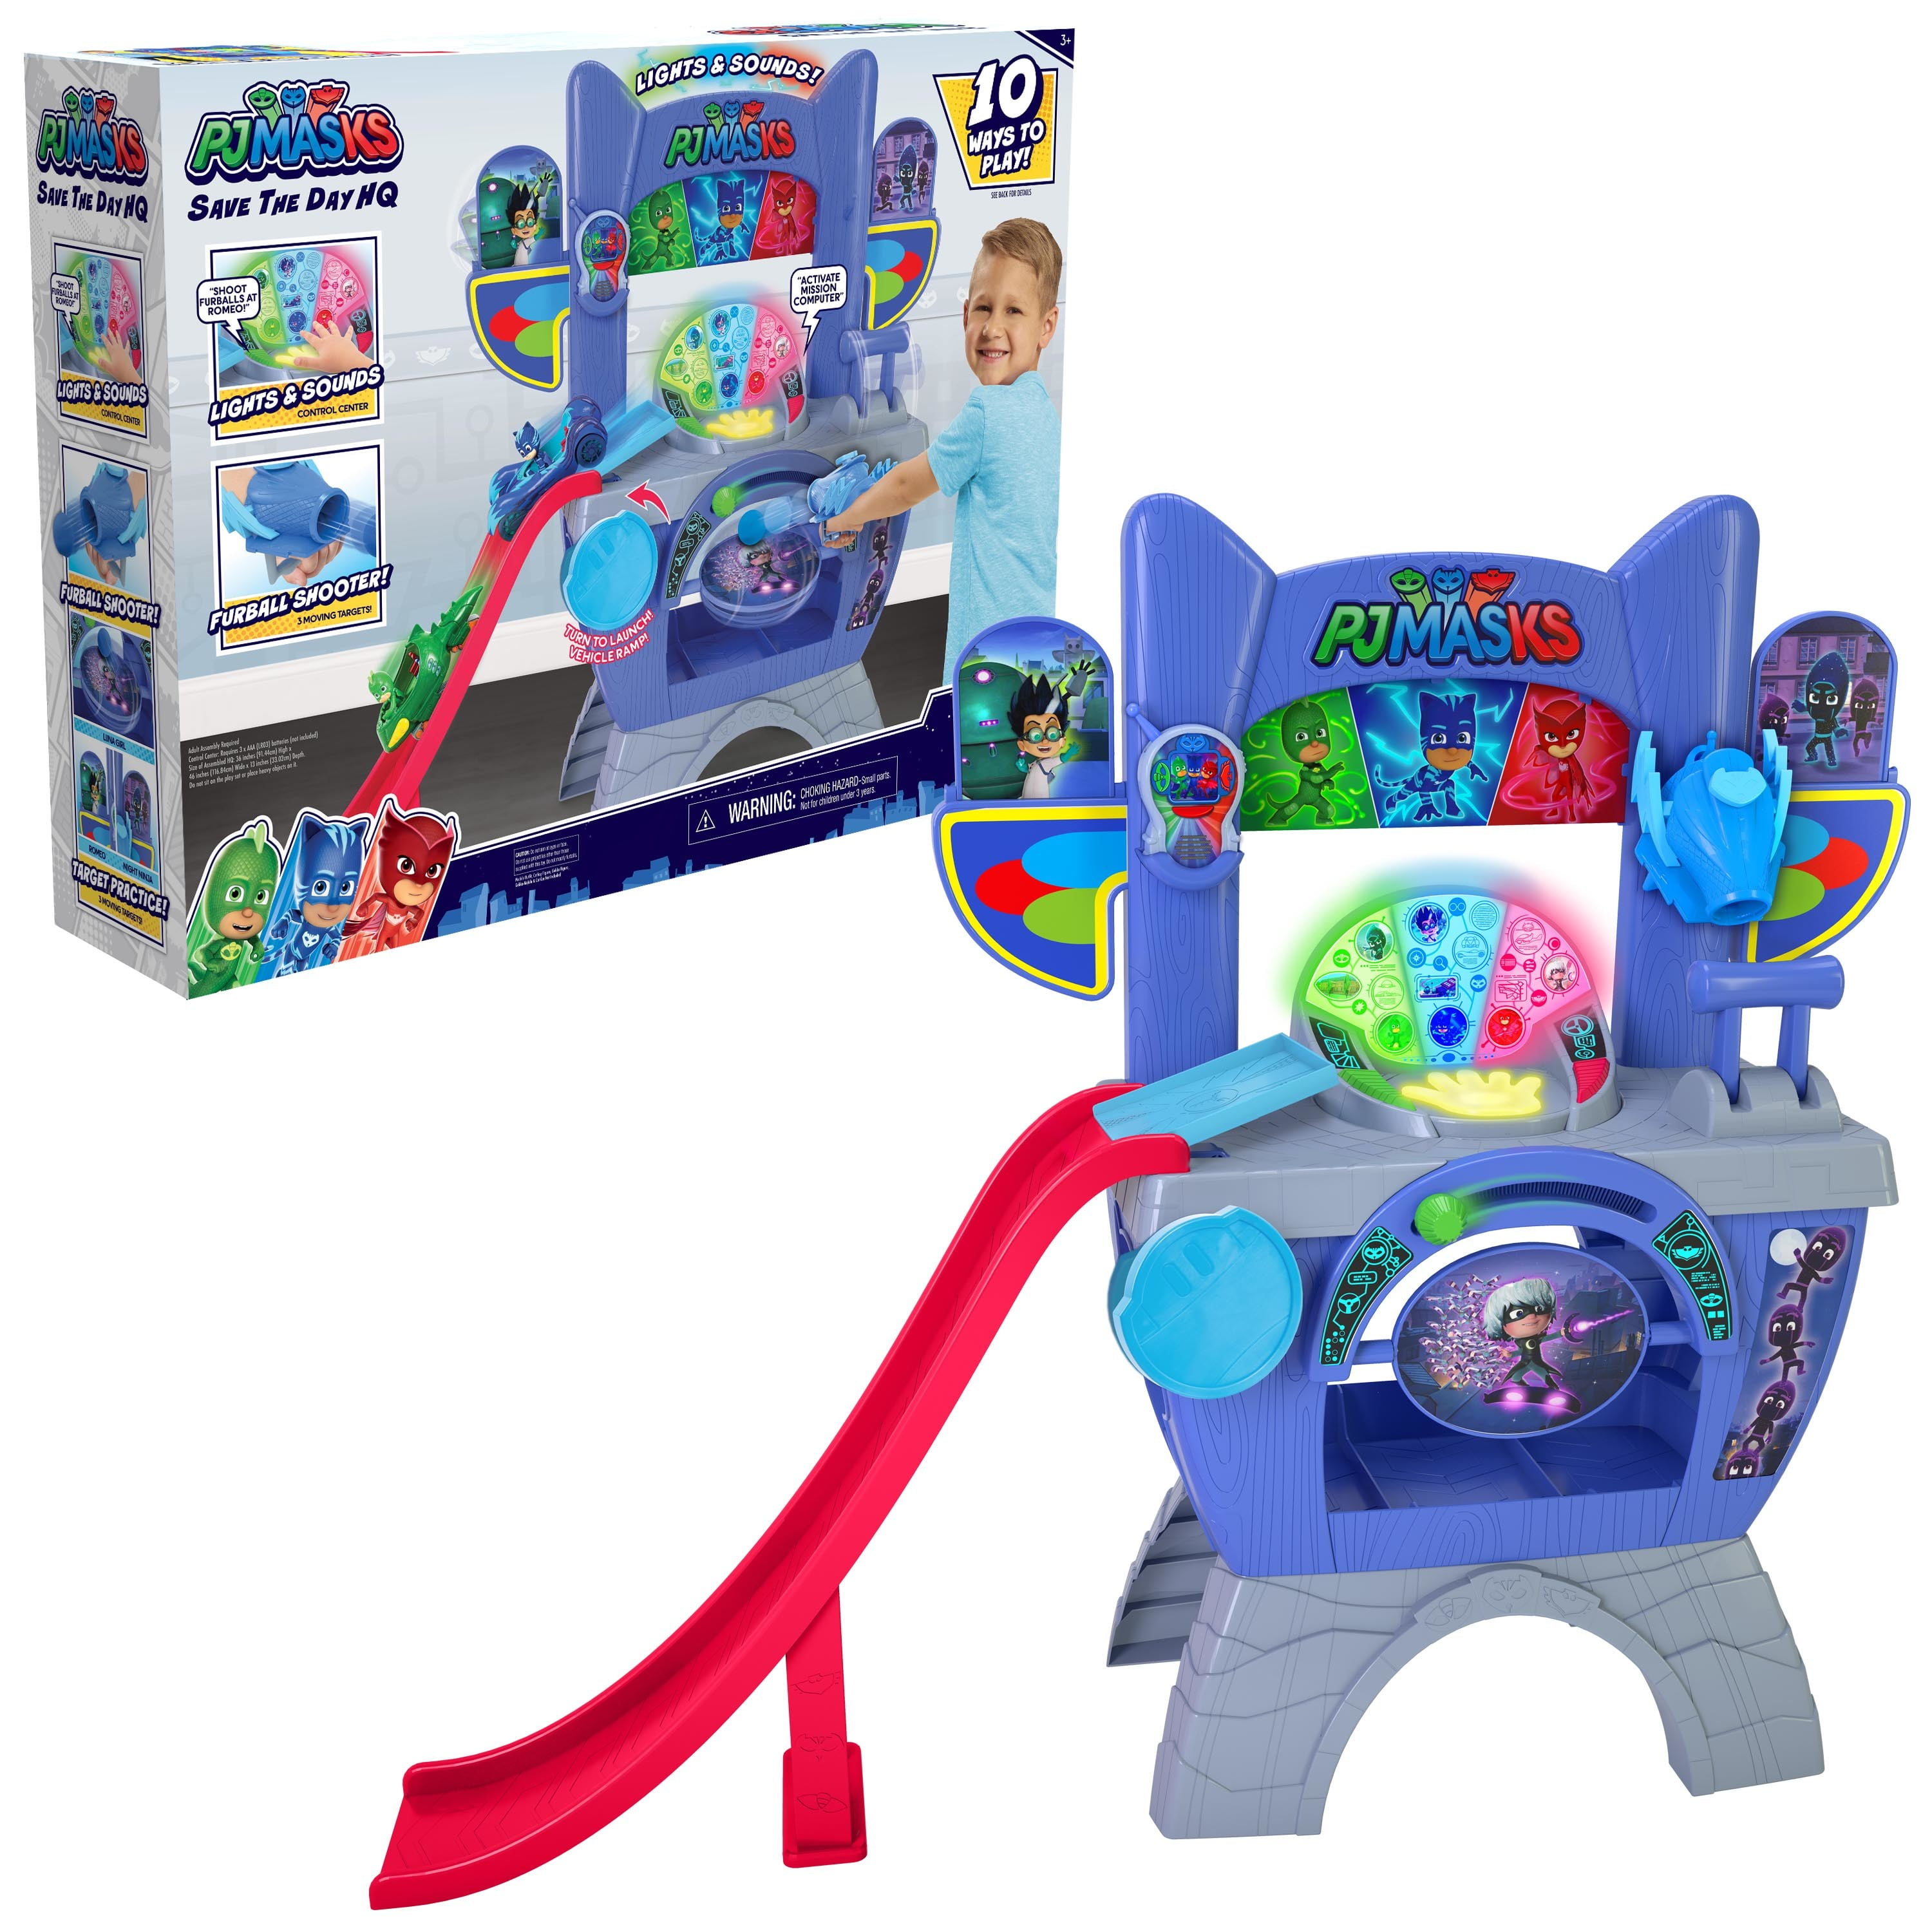 Kids Space Playset Launch and Go Jump Set Children Play Land Park Set Xmas Gift 